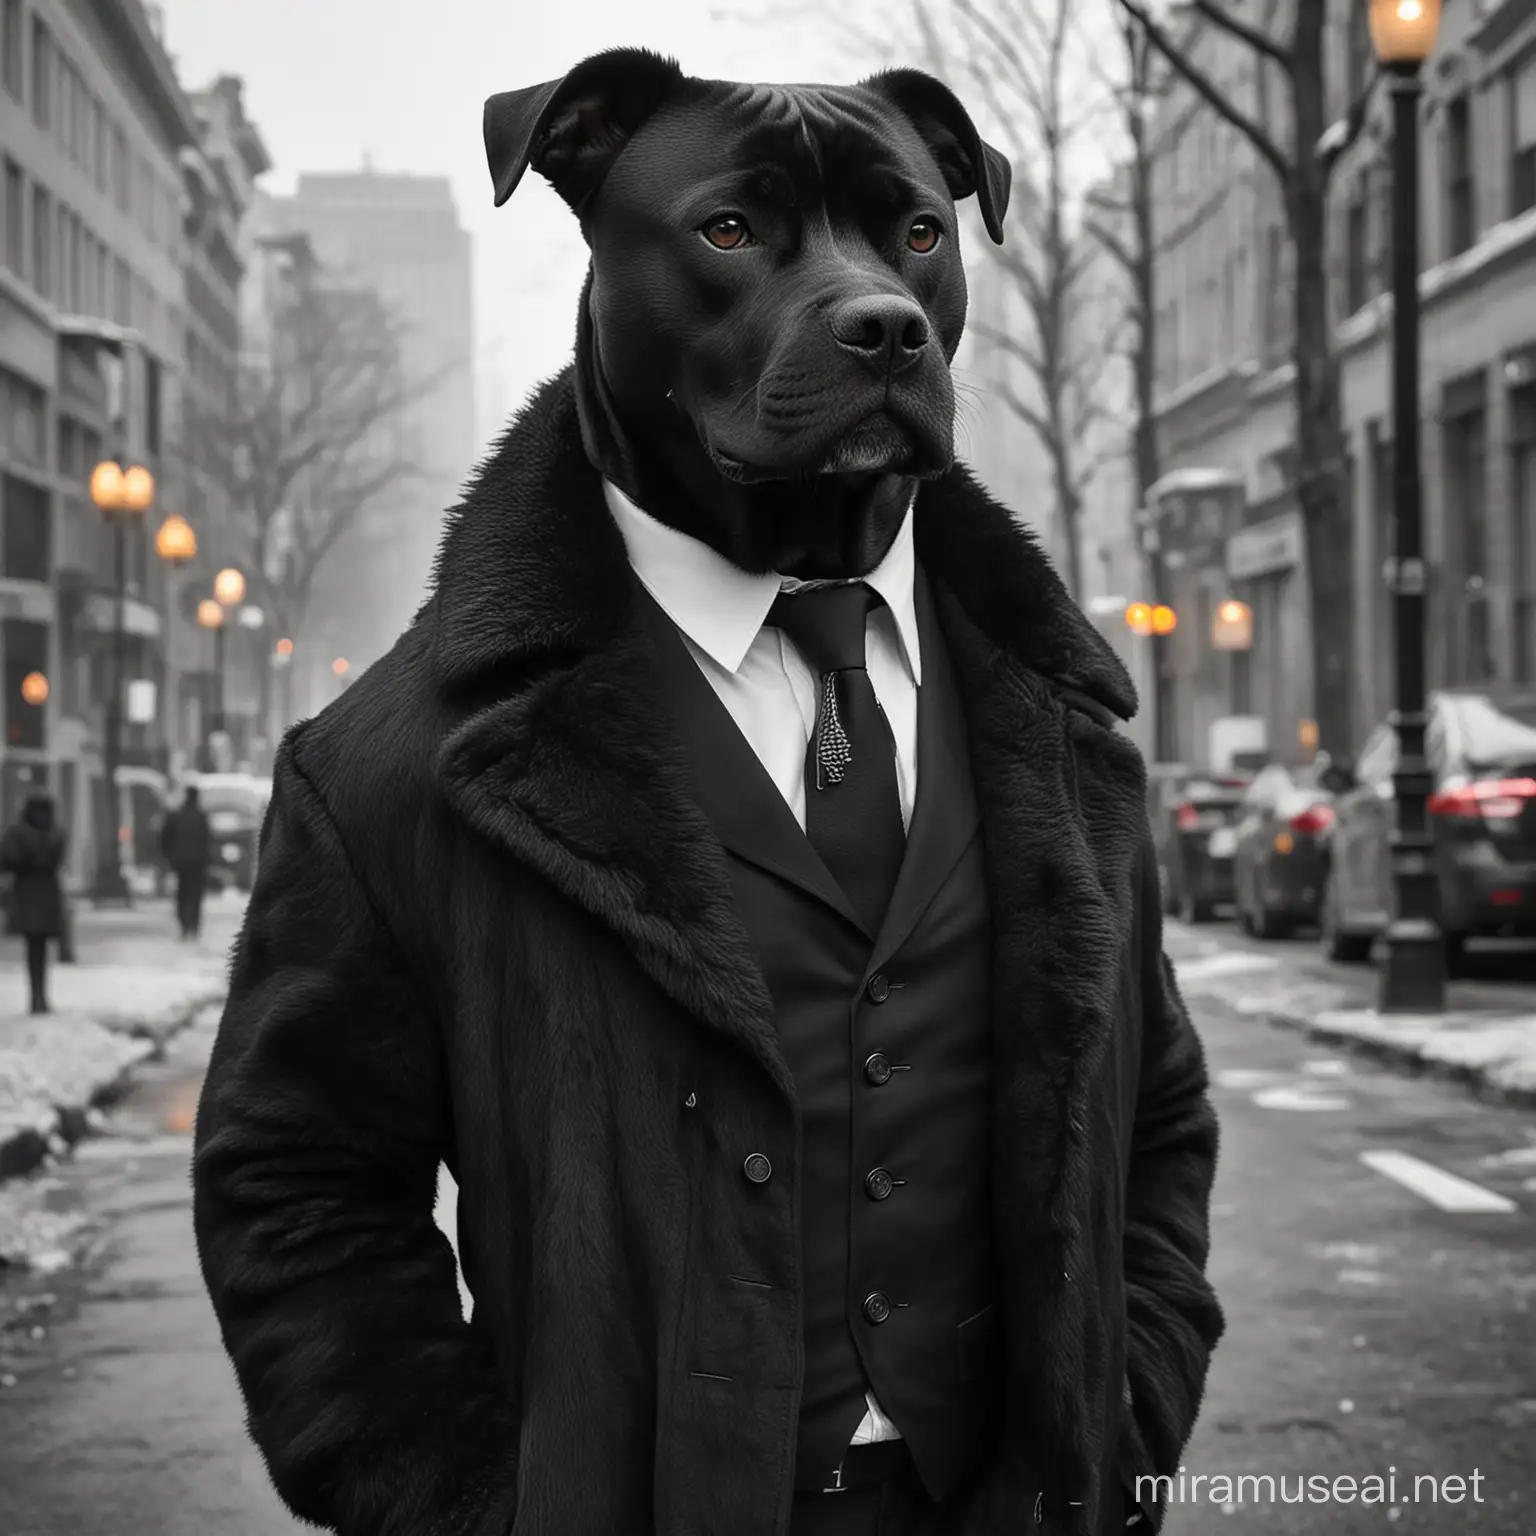 Lonely Black Pitbull with Classic White Mustache in Urban Setting